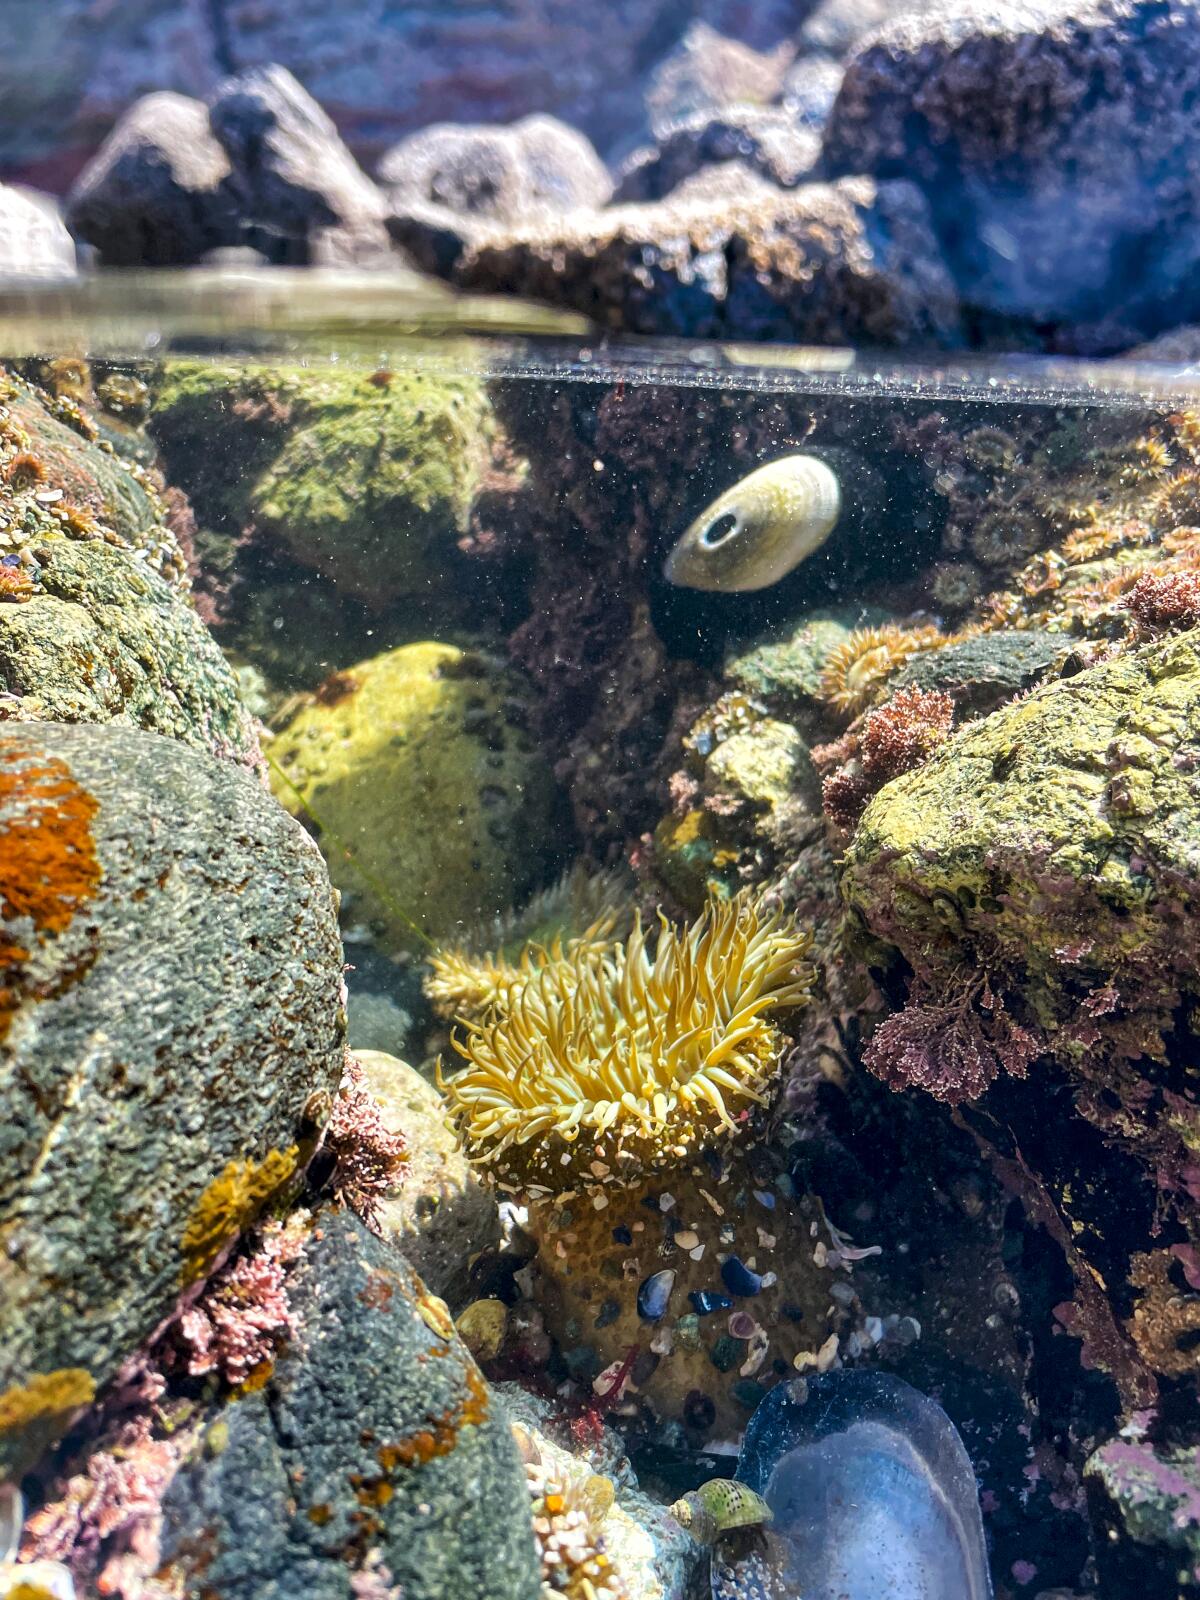 Coral and rocks underwater in a shallow tide pool.